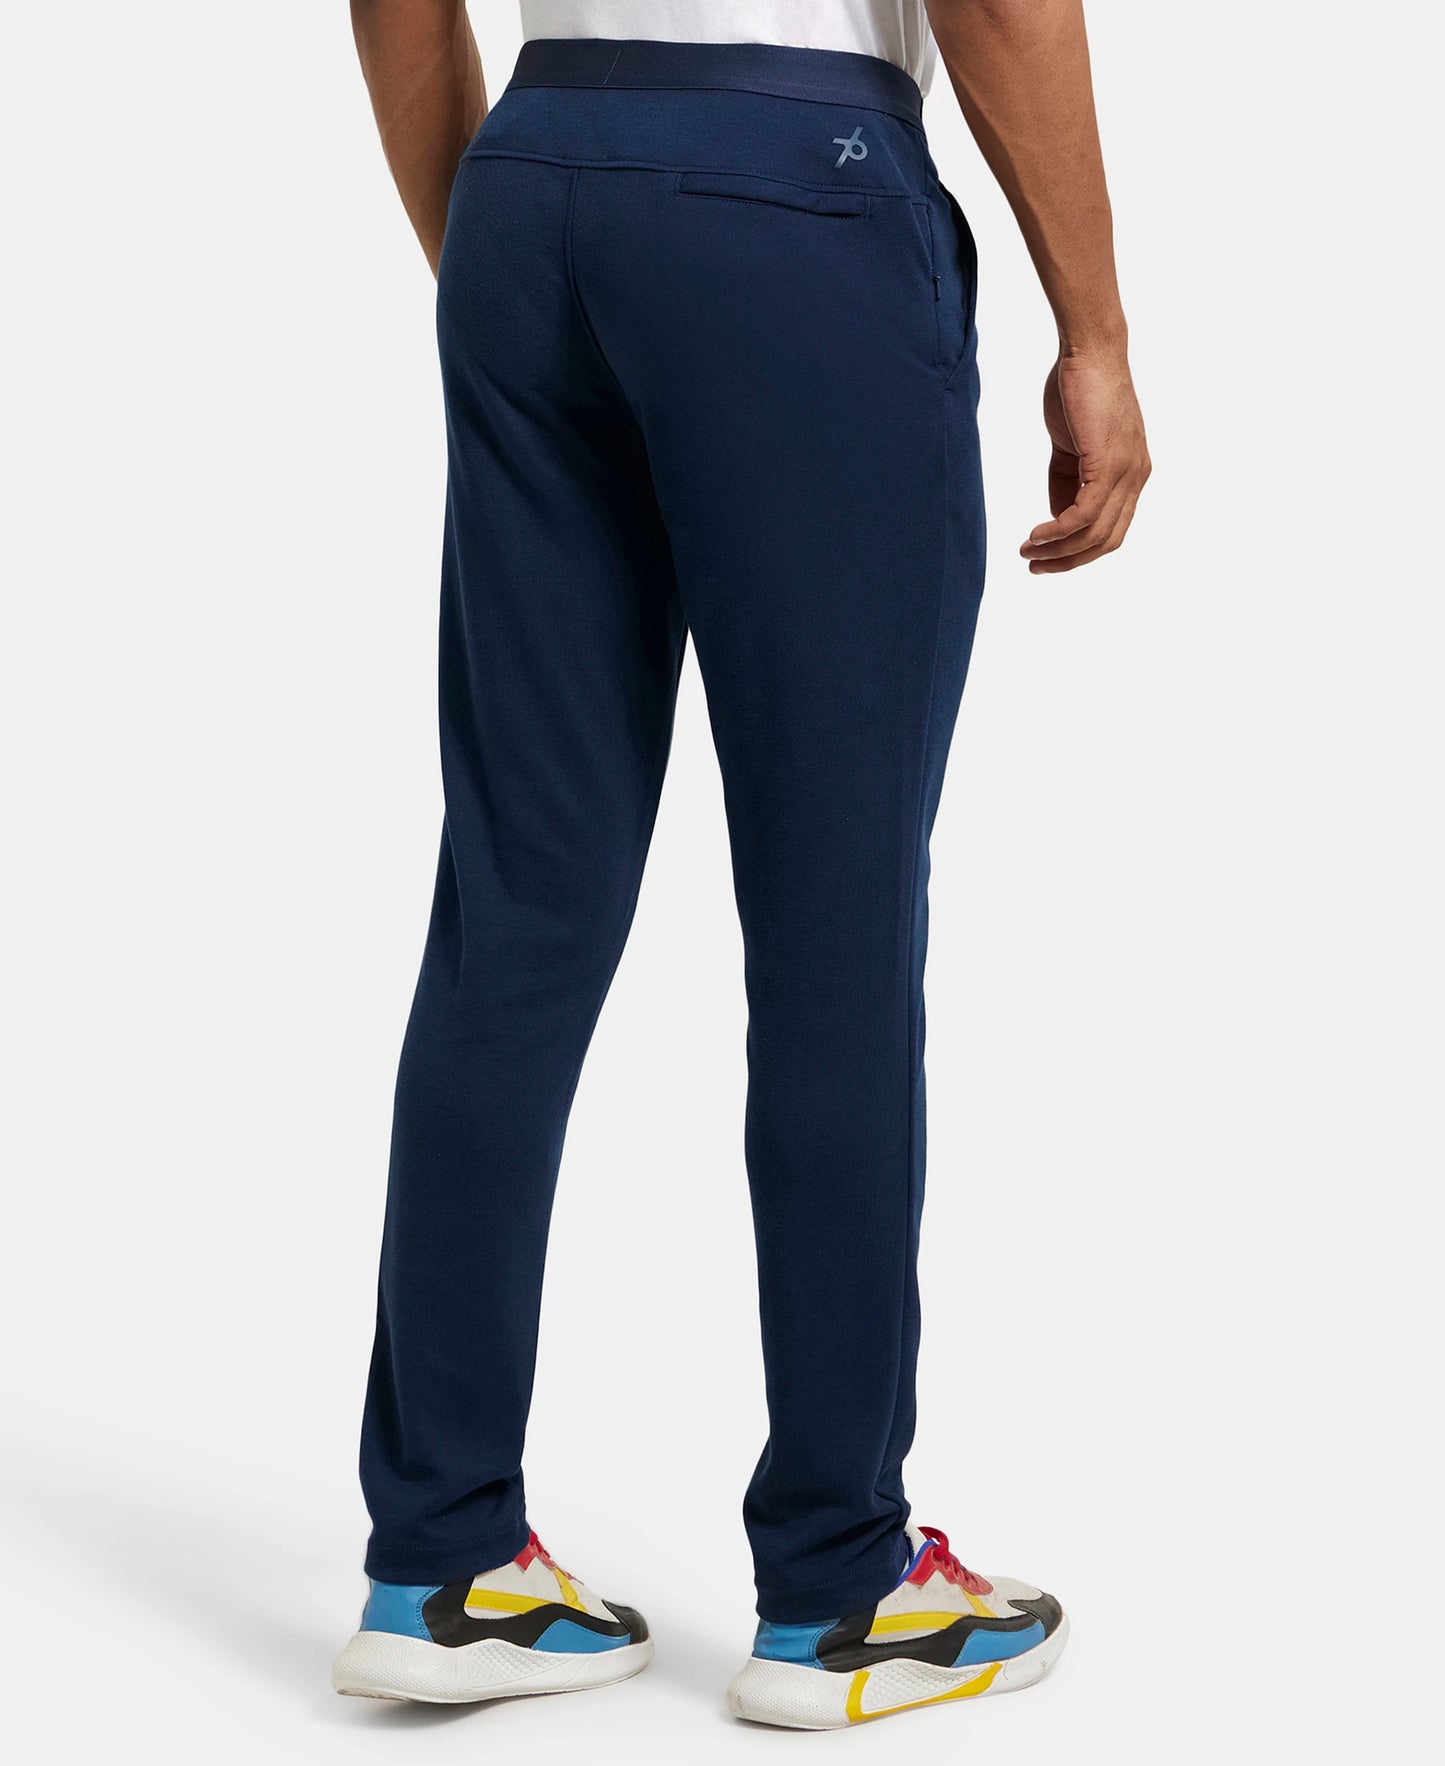 Super Combed Cotton Blend Slim Fit Trackpant with Zipper Media Pocket - Navy-3